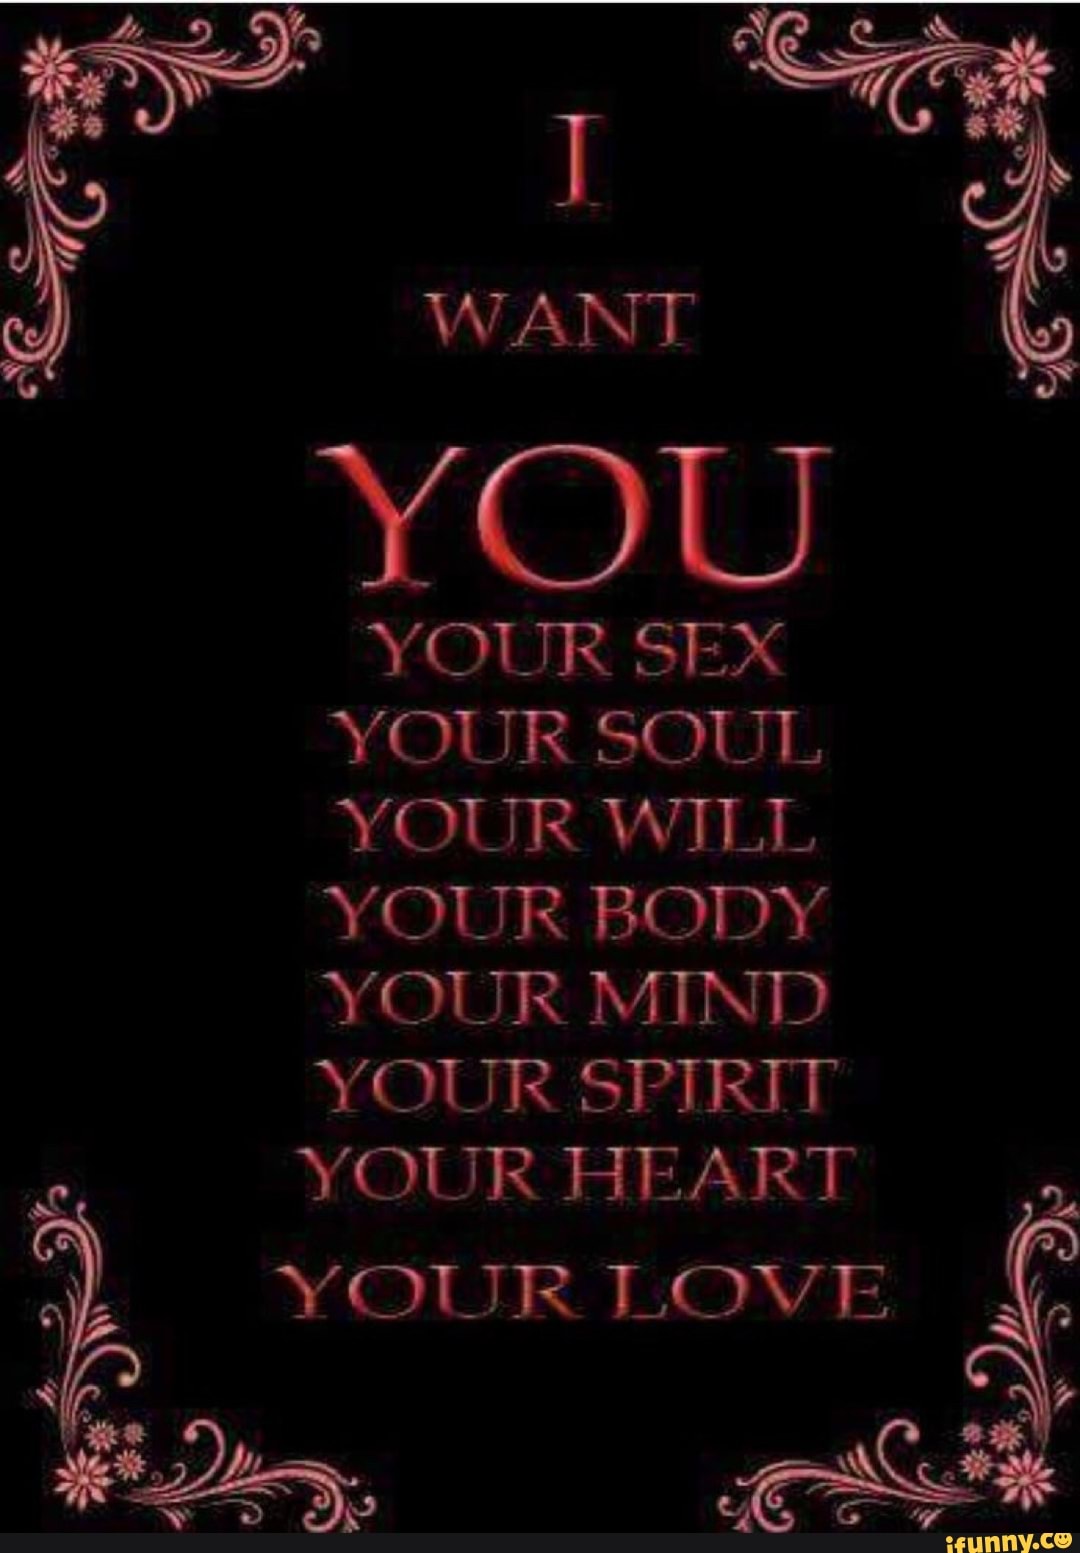 YOU YOUR SEX YOUR SOUL YOUR WILL YOUR BODY Y OUR MIND YOUR SPIRIT YOUR HEAR...